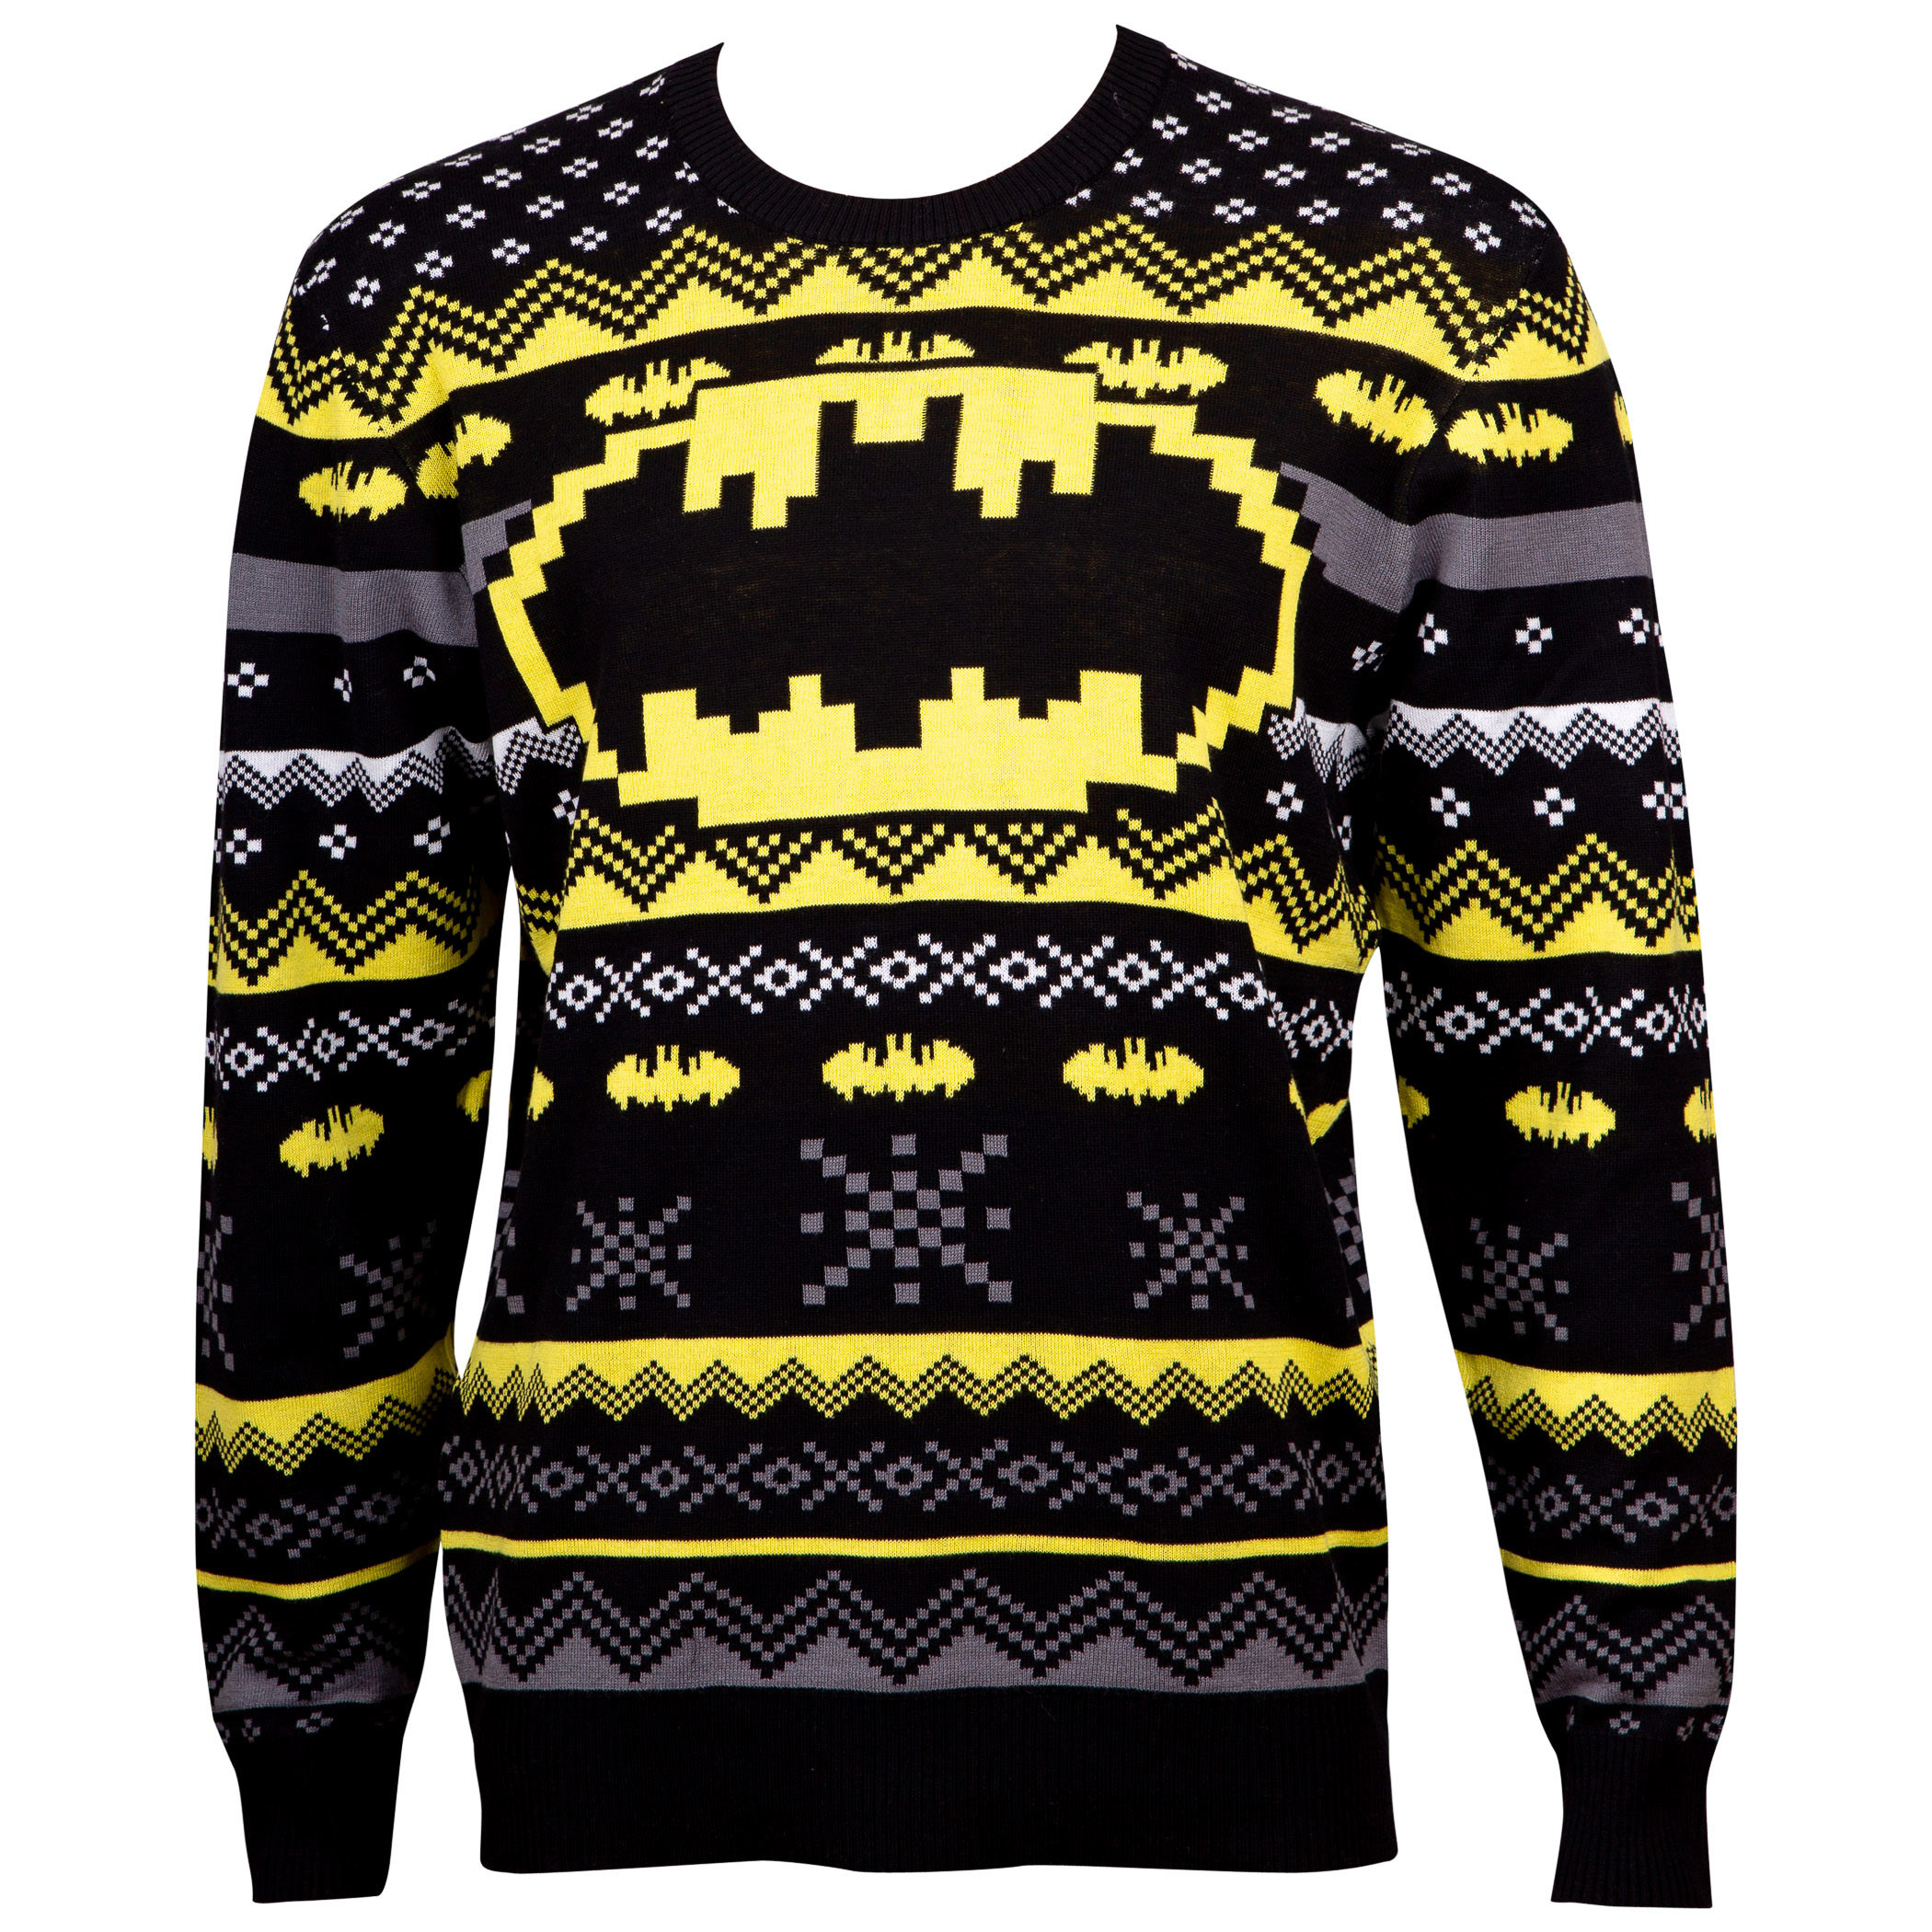 Batman Patterned Ugly Holiday Sweater